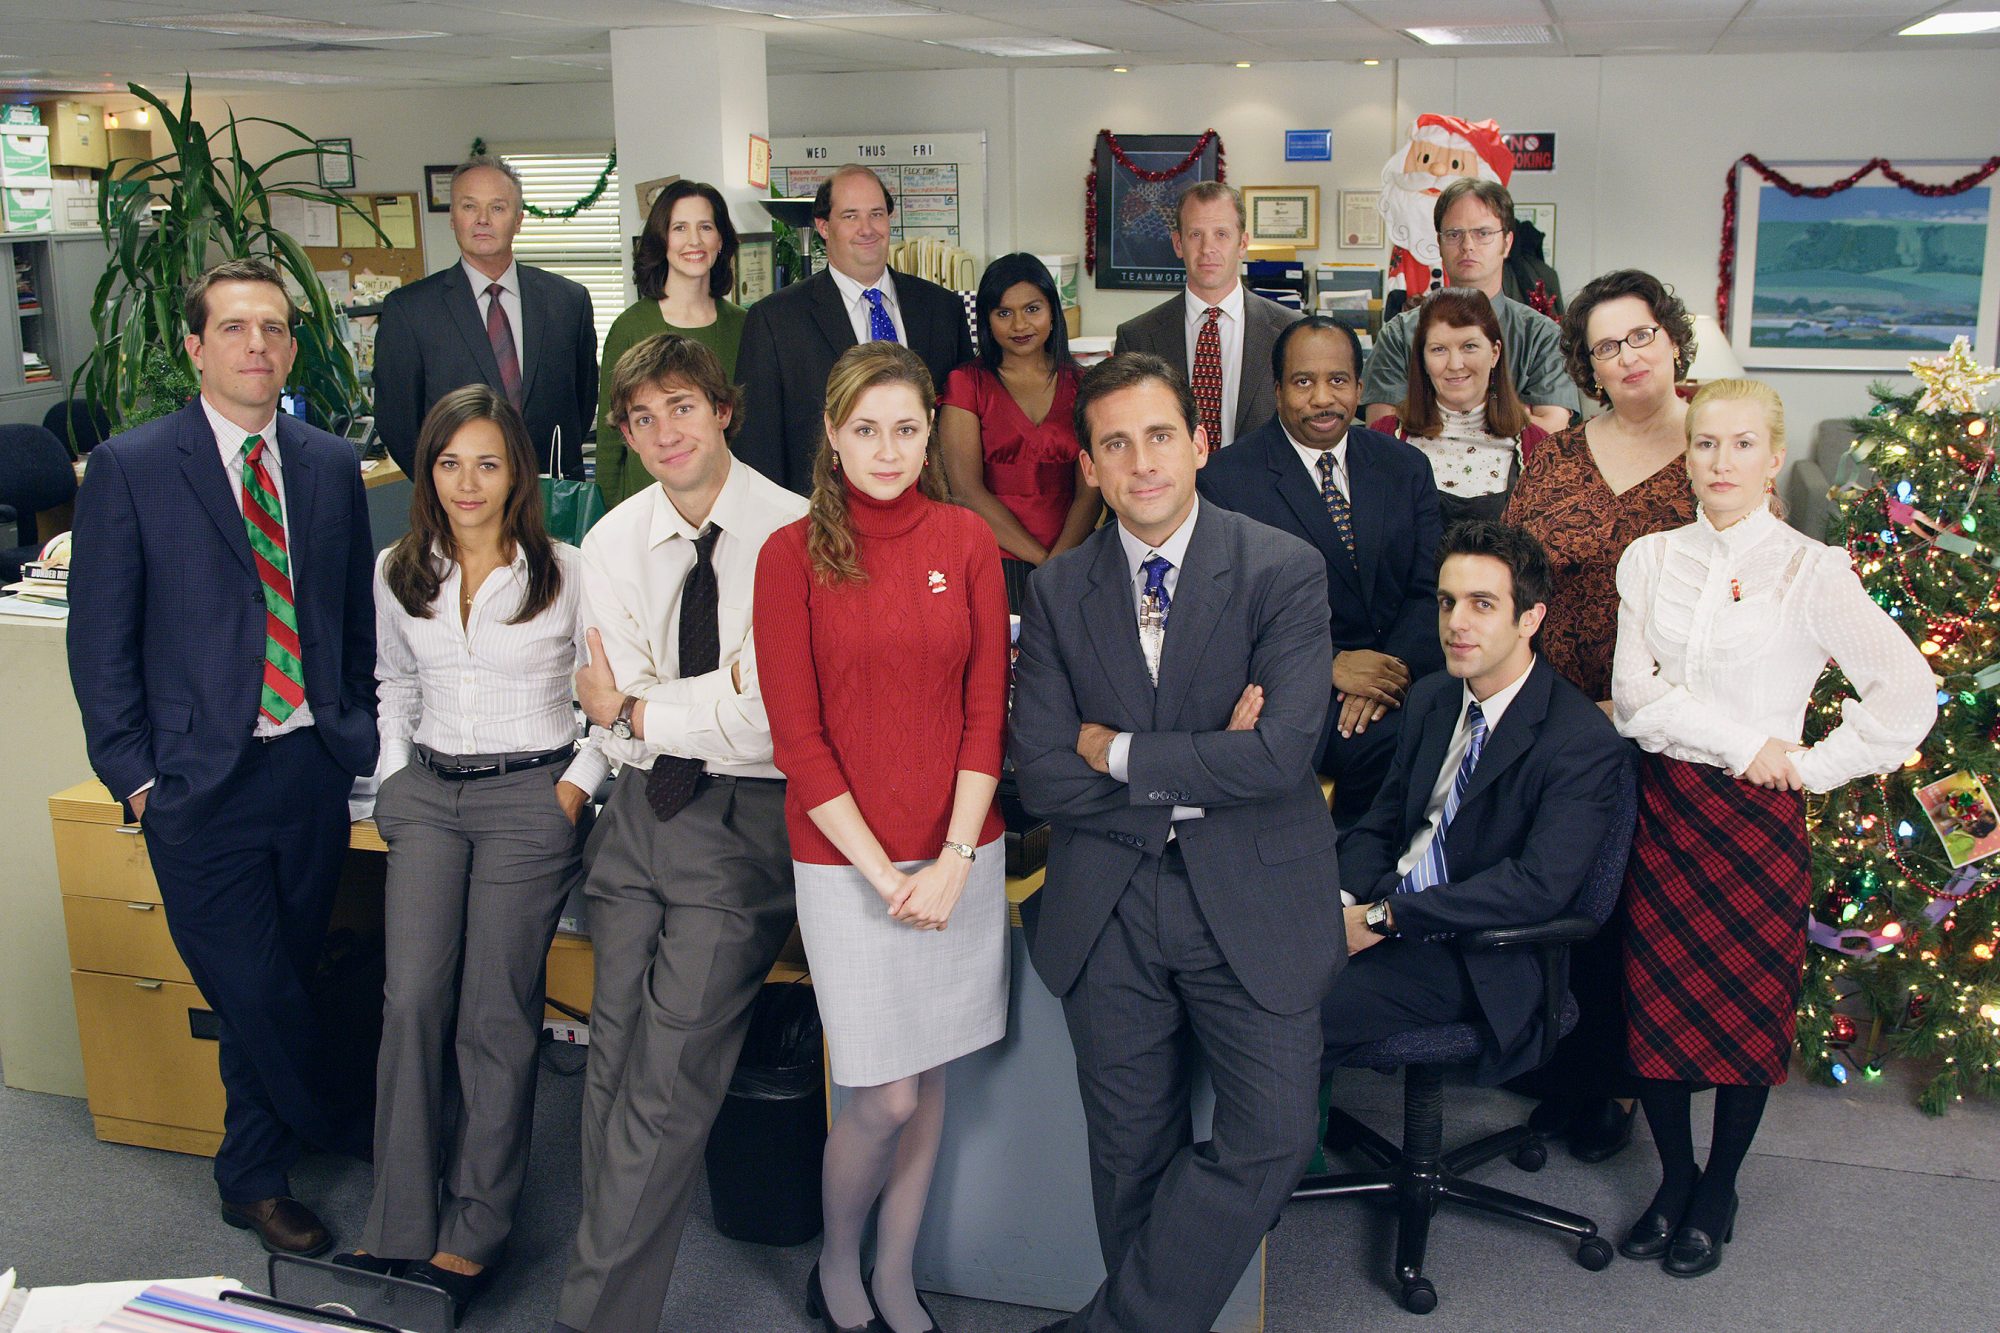 All Episodes of The Office Available for Free For A Week On Peacock